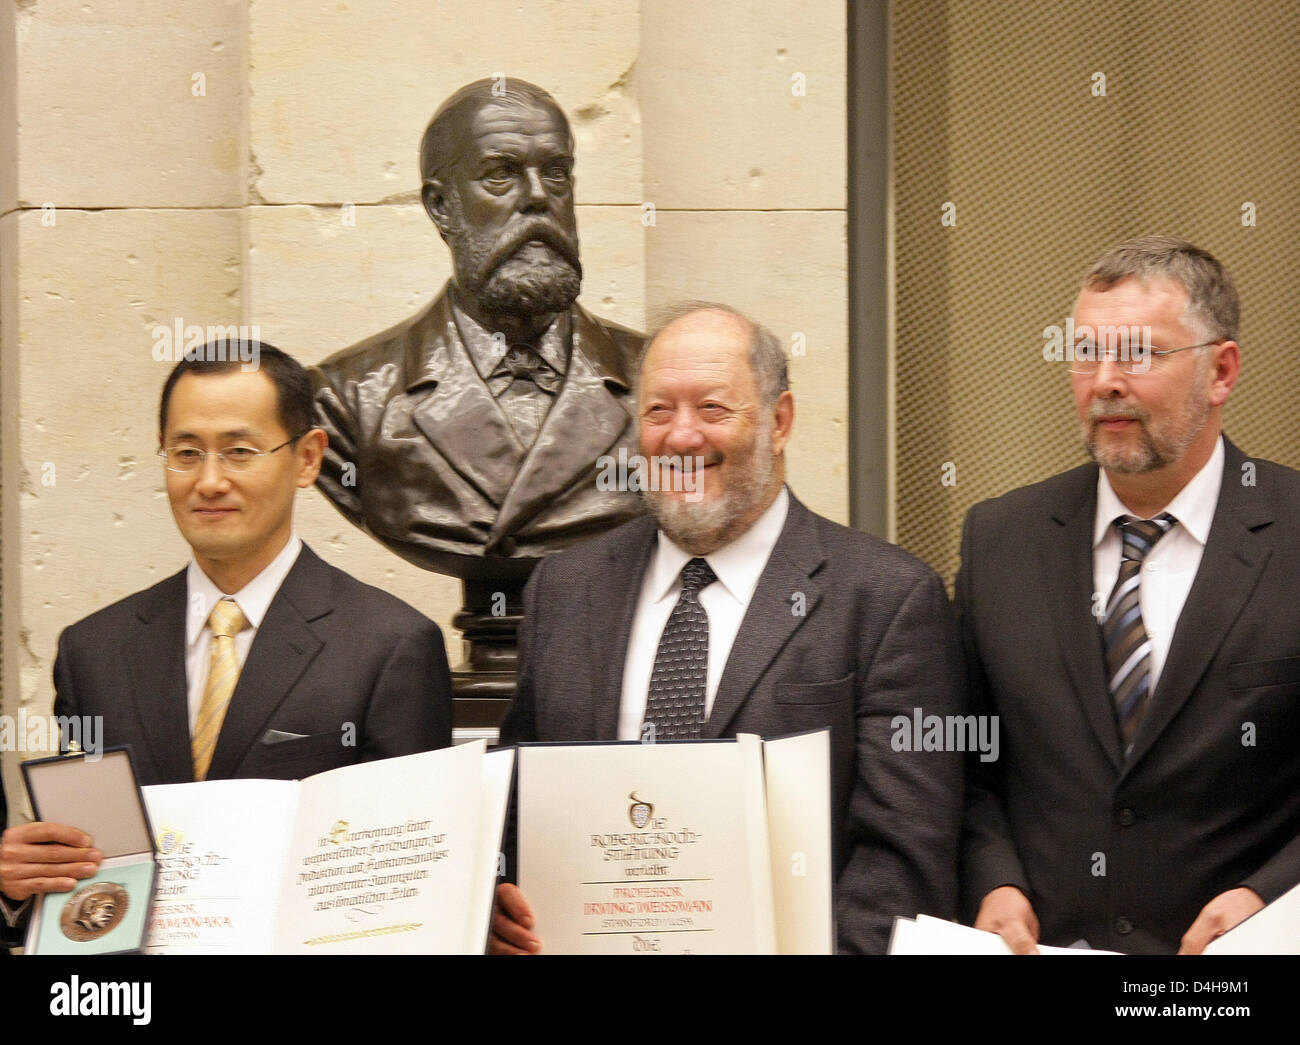 (L-R) Scientist professors Japanese Shinya Yamanaka, U.S. Irbing Weissman, and German Hans Robert Schoeler pose with their Rober Koch Prizes 2008 in Berlin, Germany, 14 November 2008. Mr.  Yamanake was awarded for his ground-breaking research of pluripotent stem cells, Mr. Weissman for his research on phylogenesis and the development of stem cells, and Mr. Schoeler for his research Stock Photo